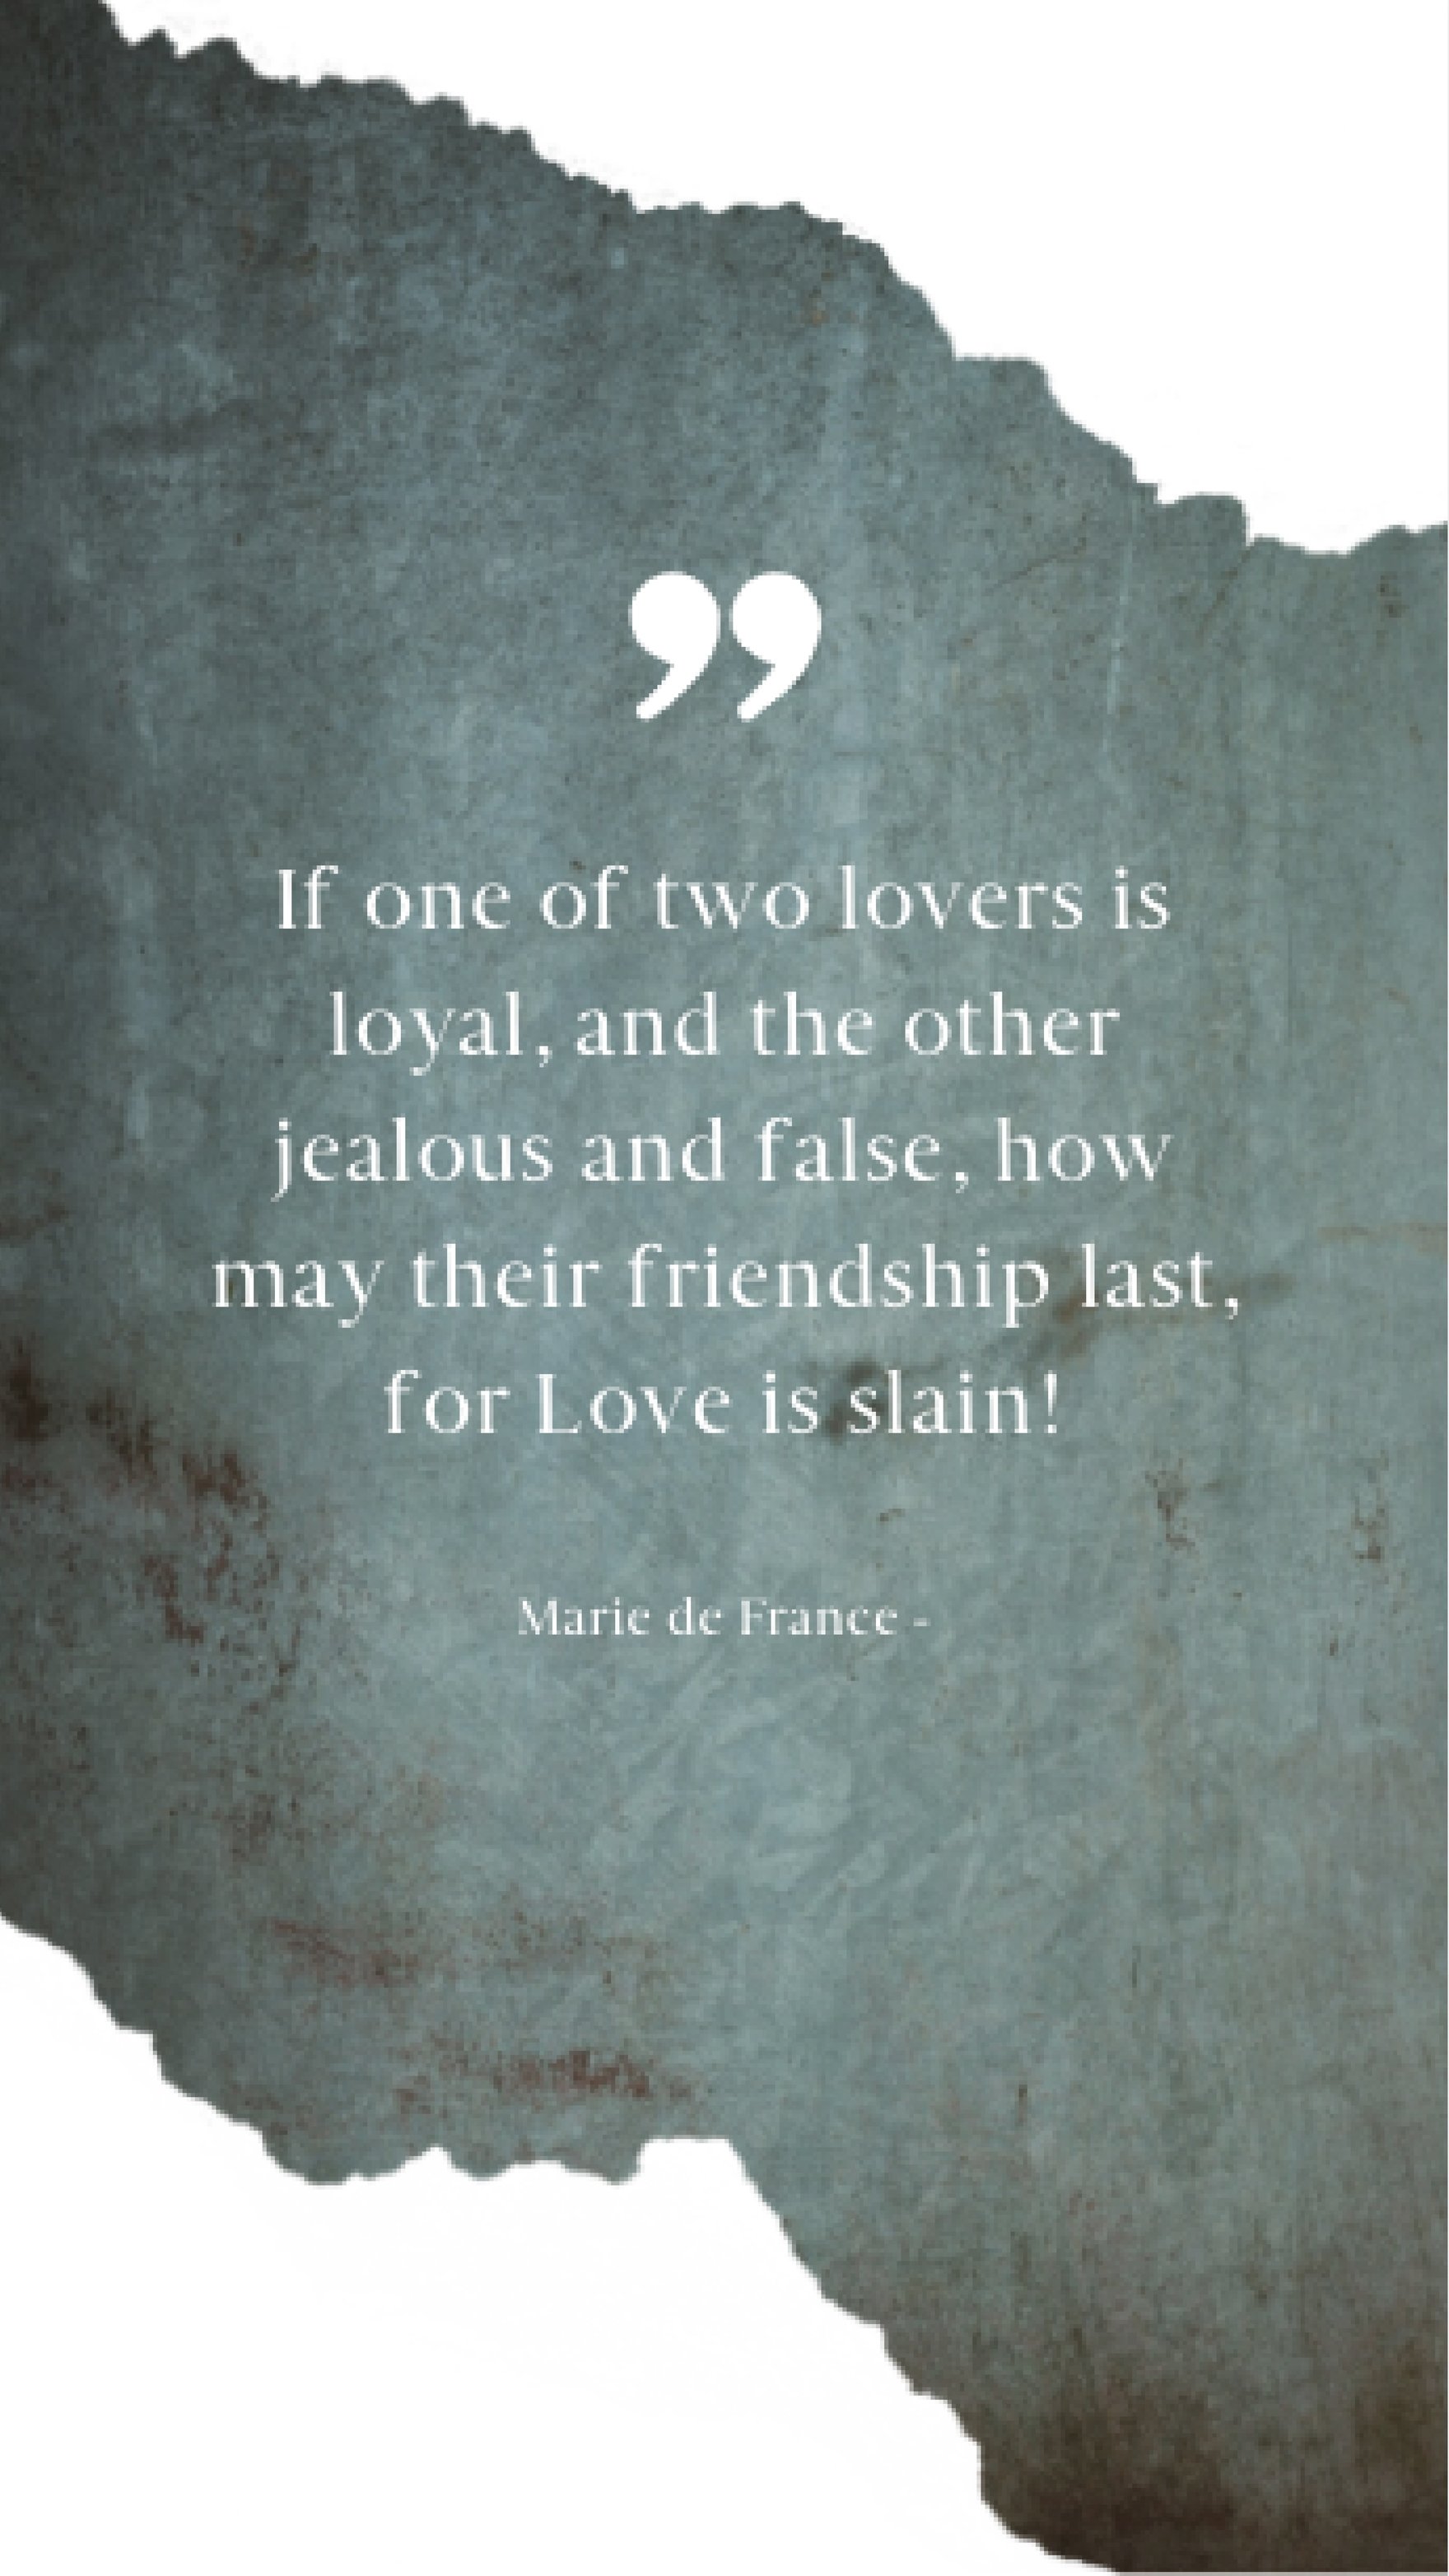 Marie de France - If one of two lovers is loyal, and the other jealous and false, how may their friendship last, for Love is slain! Template